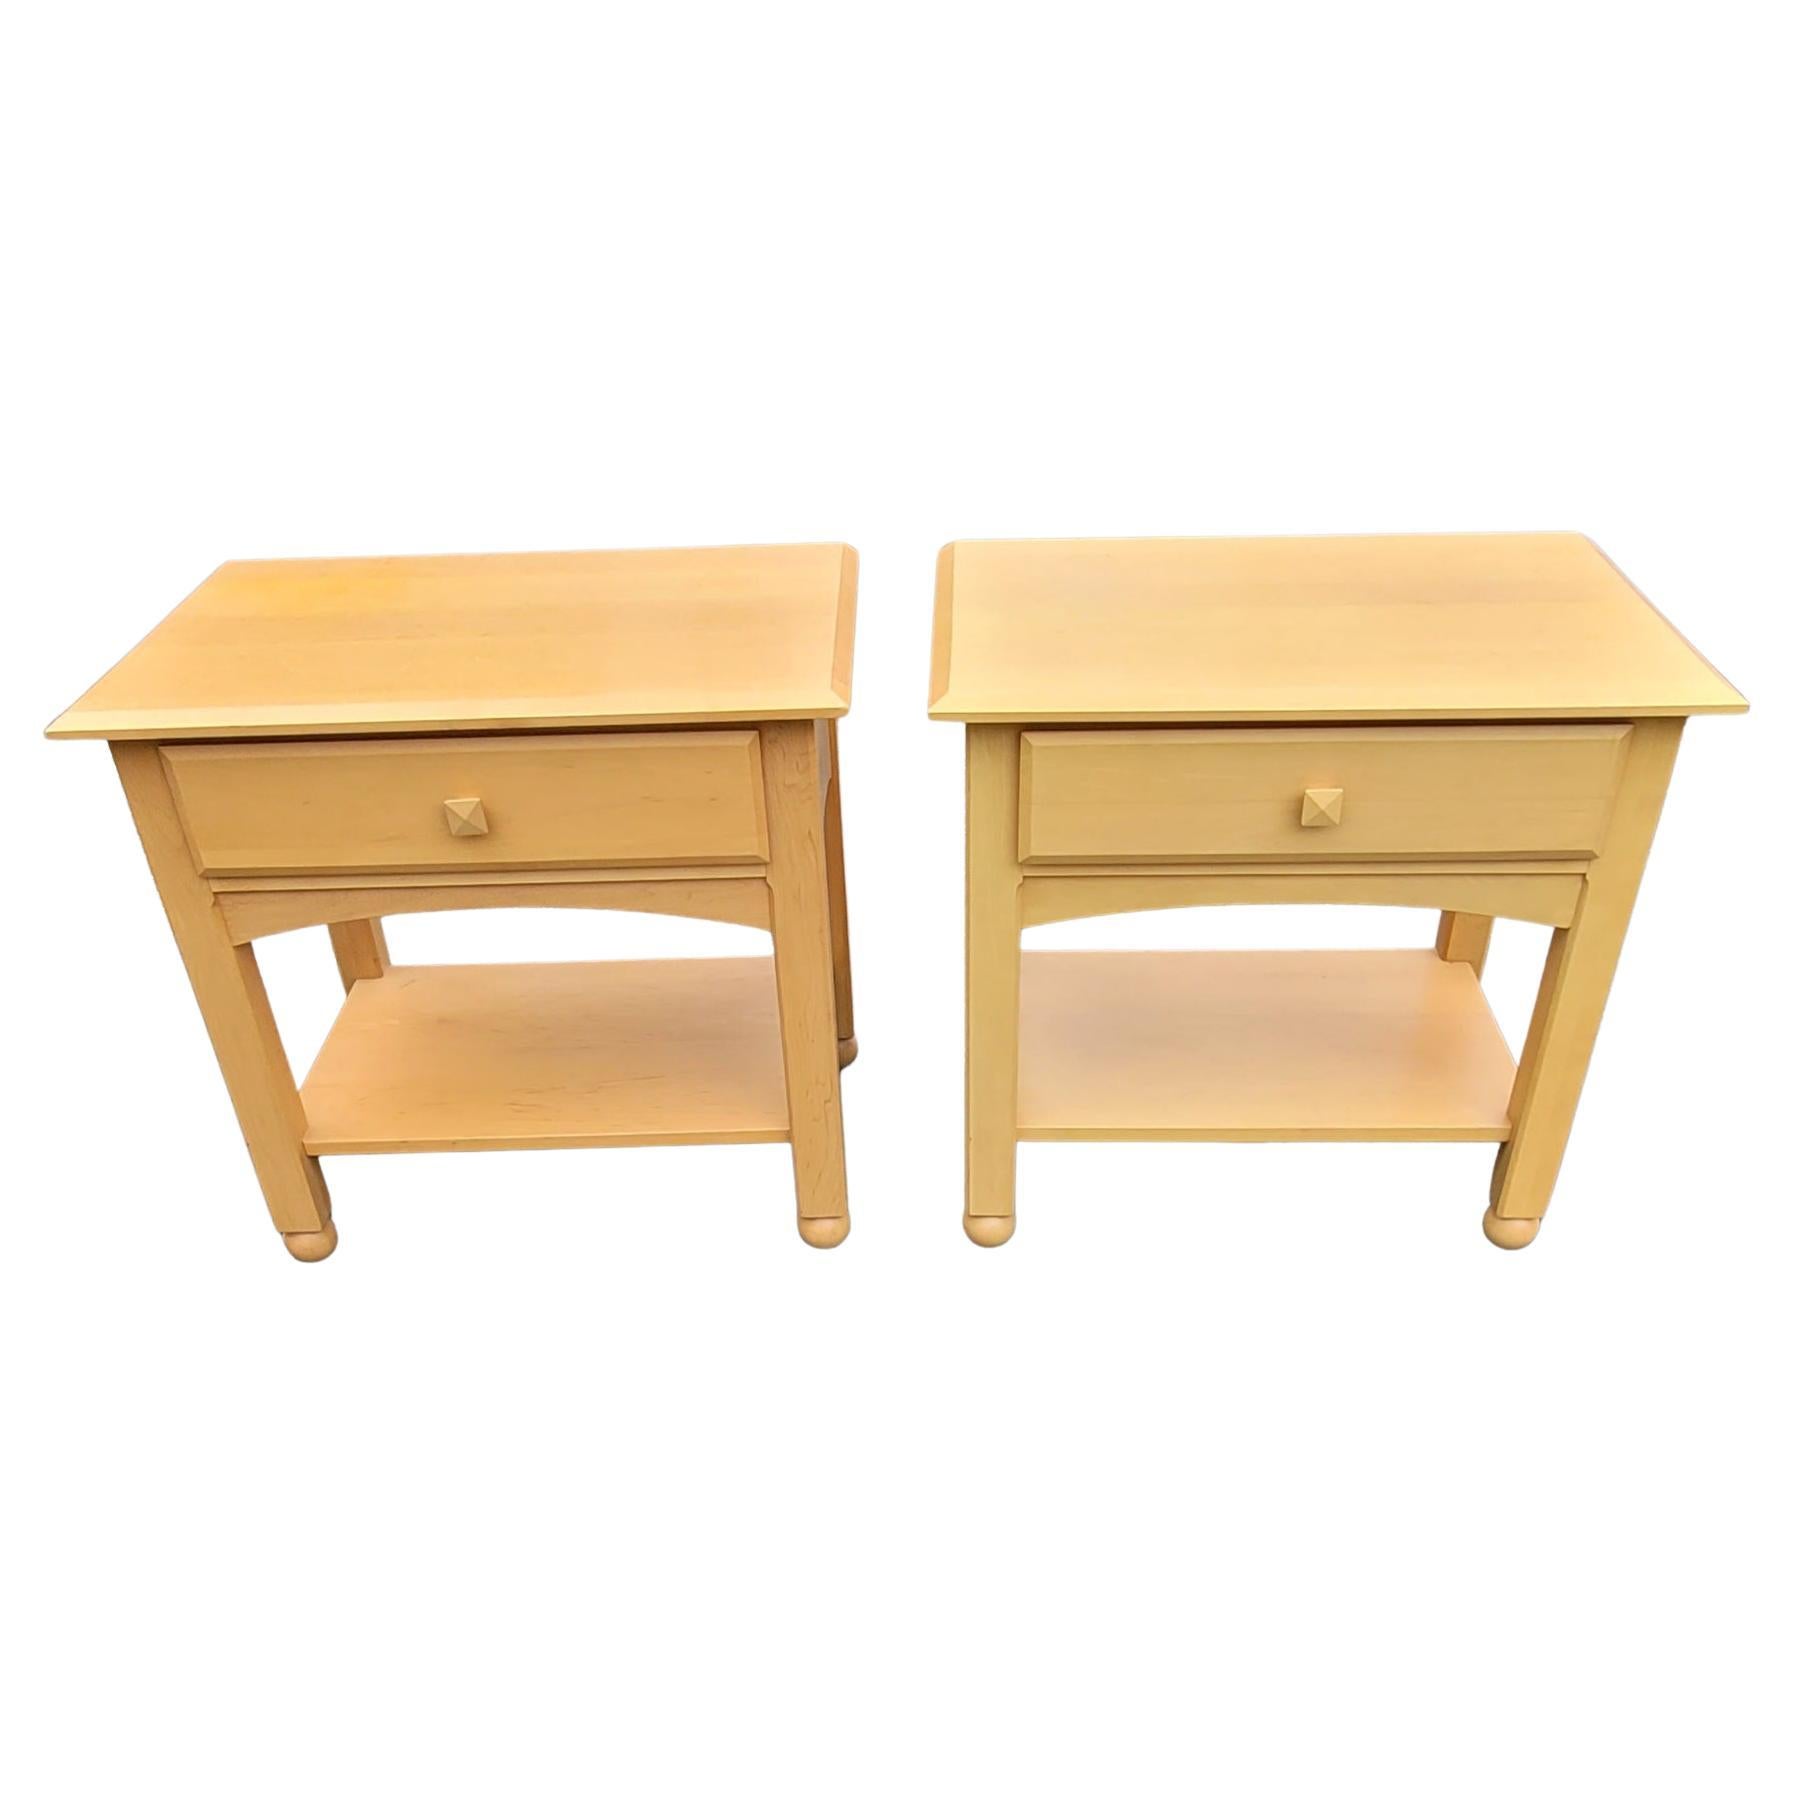 Excellent pair of Ethan Allen American Dimensions Collection Birch bedside tables  in excellent condition.